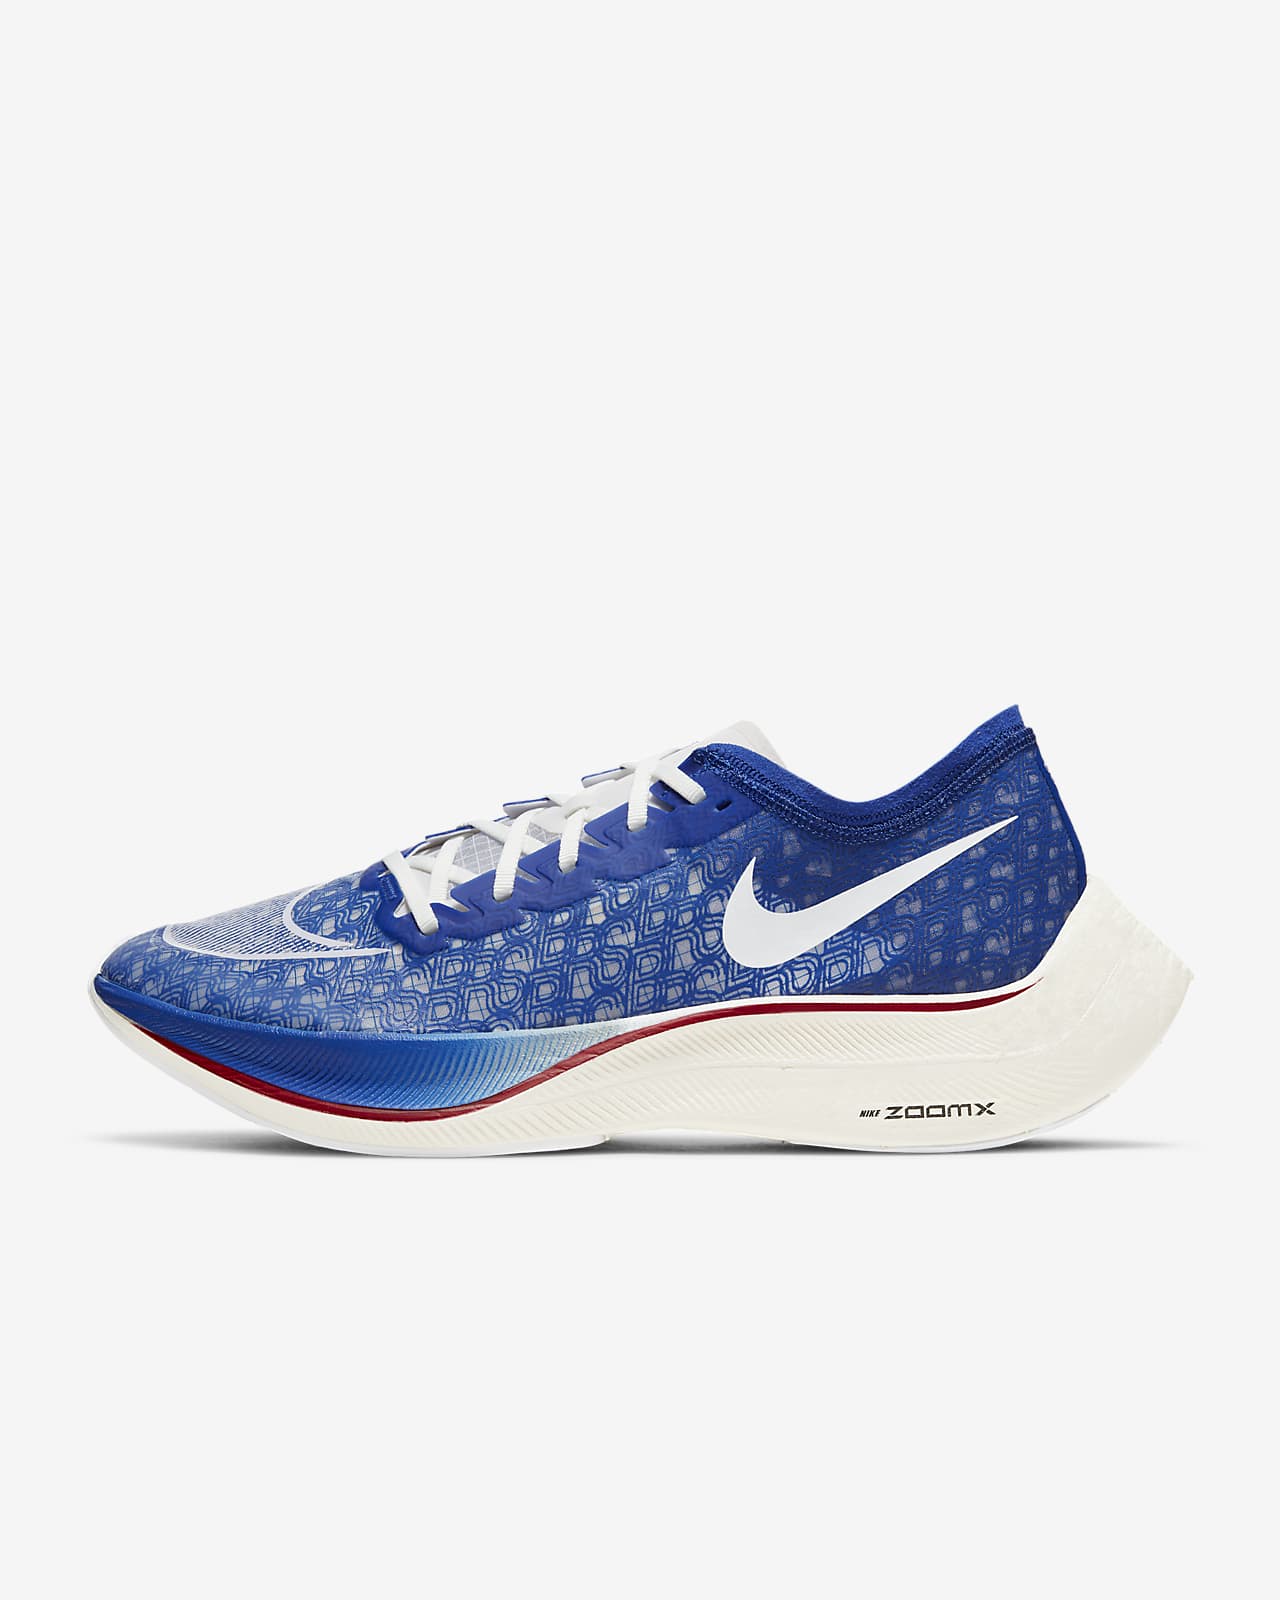 air zoom vaporfly next